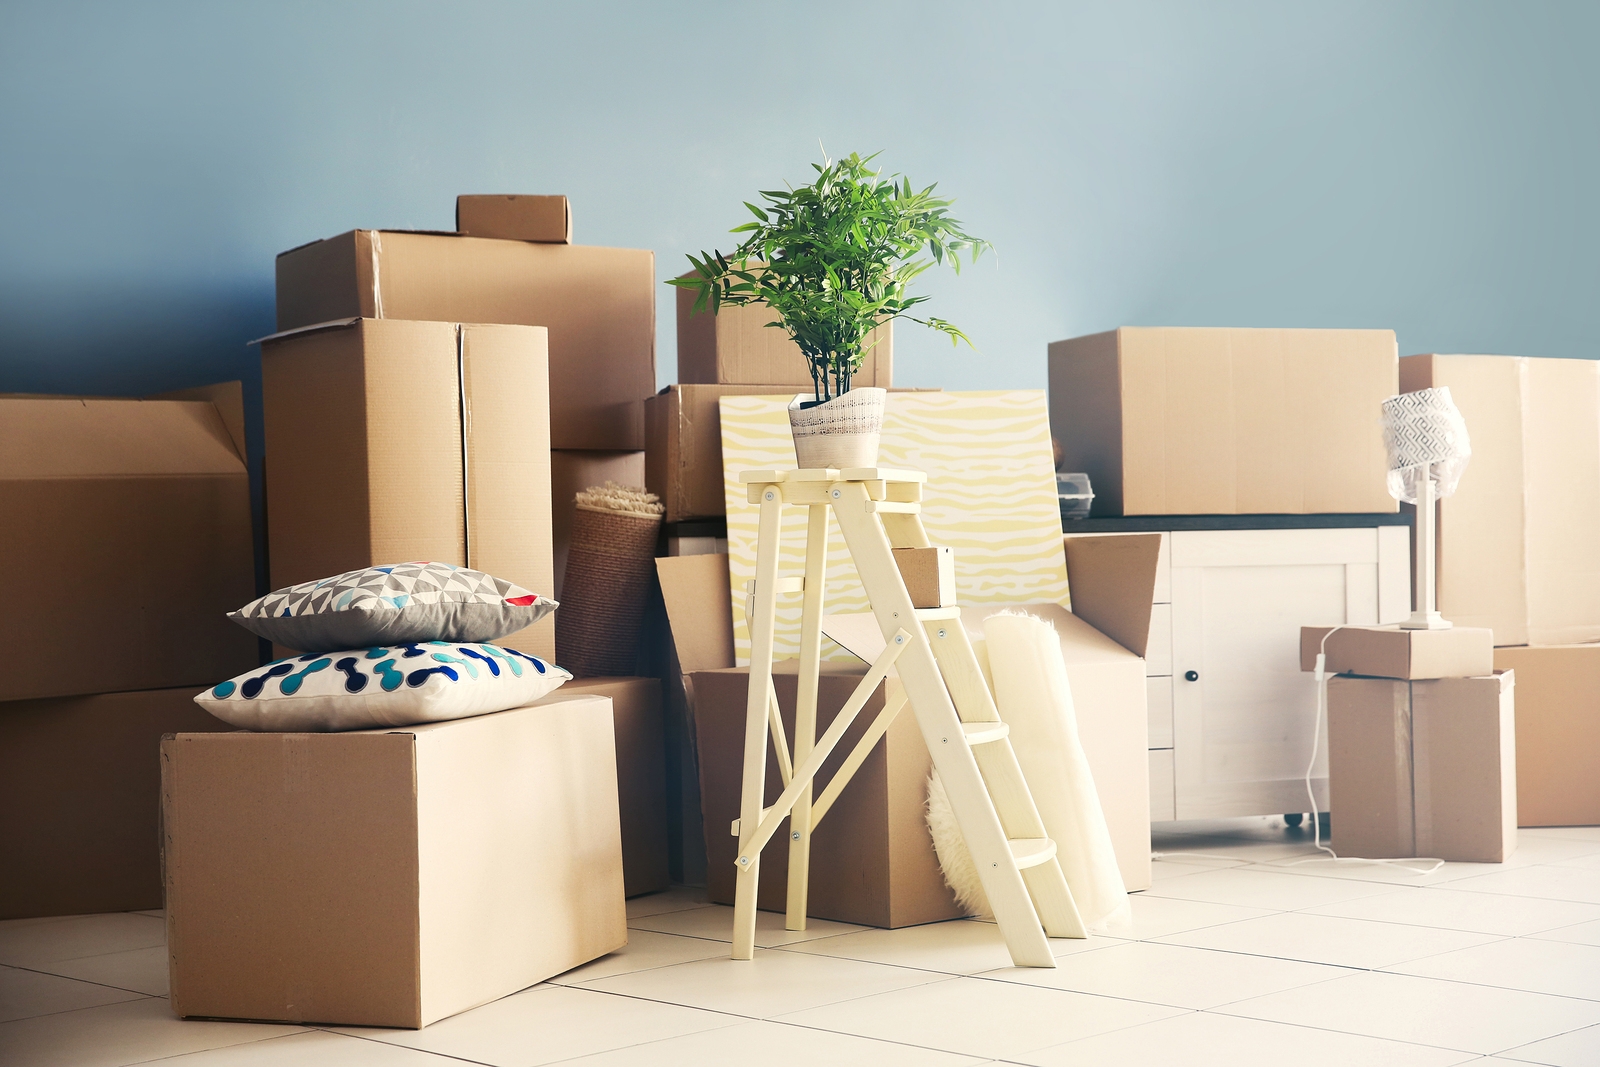 Professional Movers and Packers – Take full advantage of Residential Moving